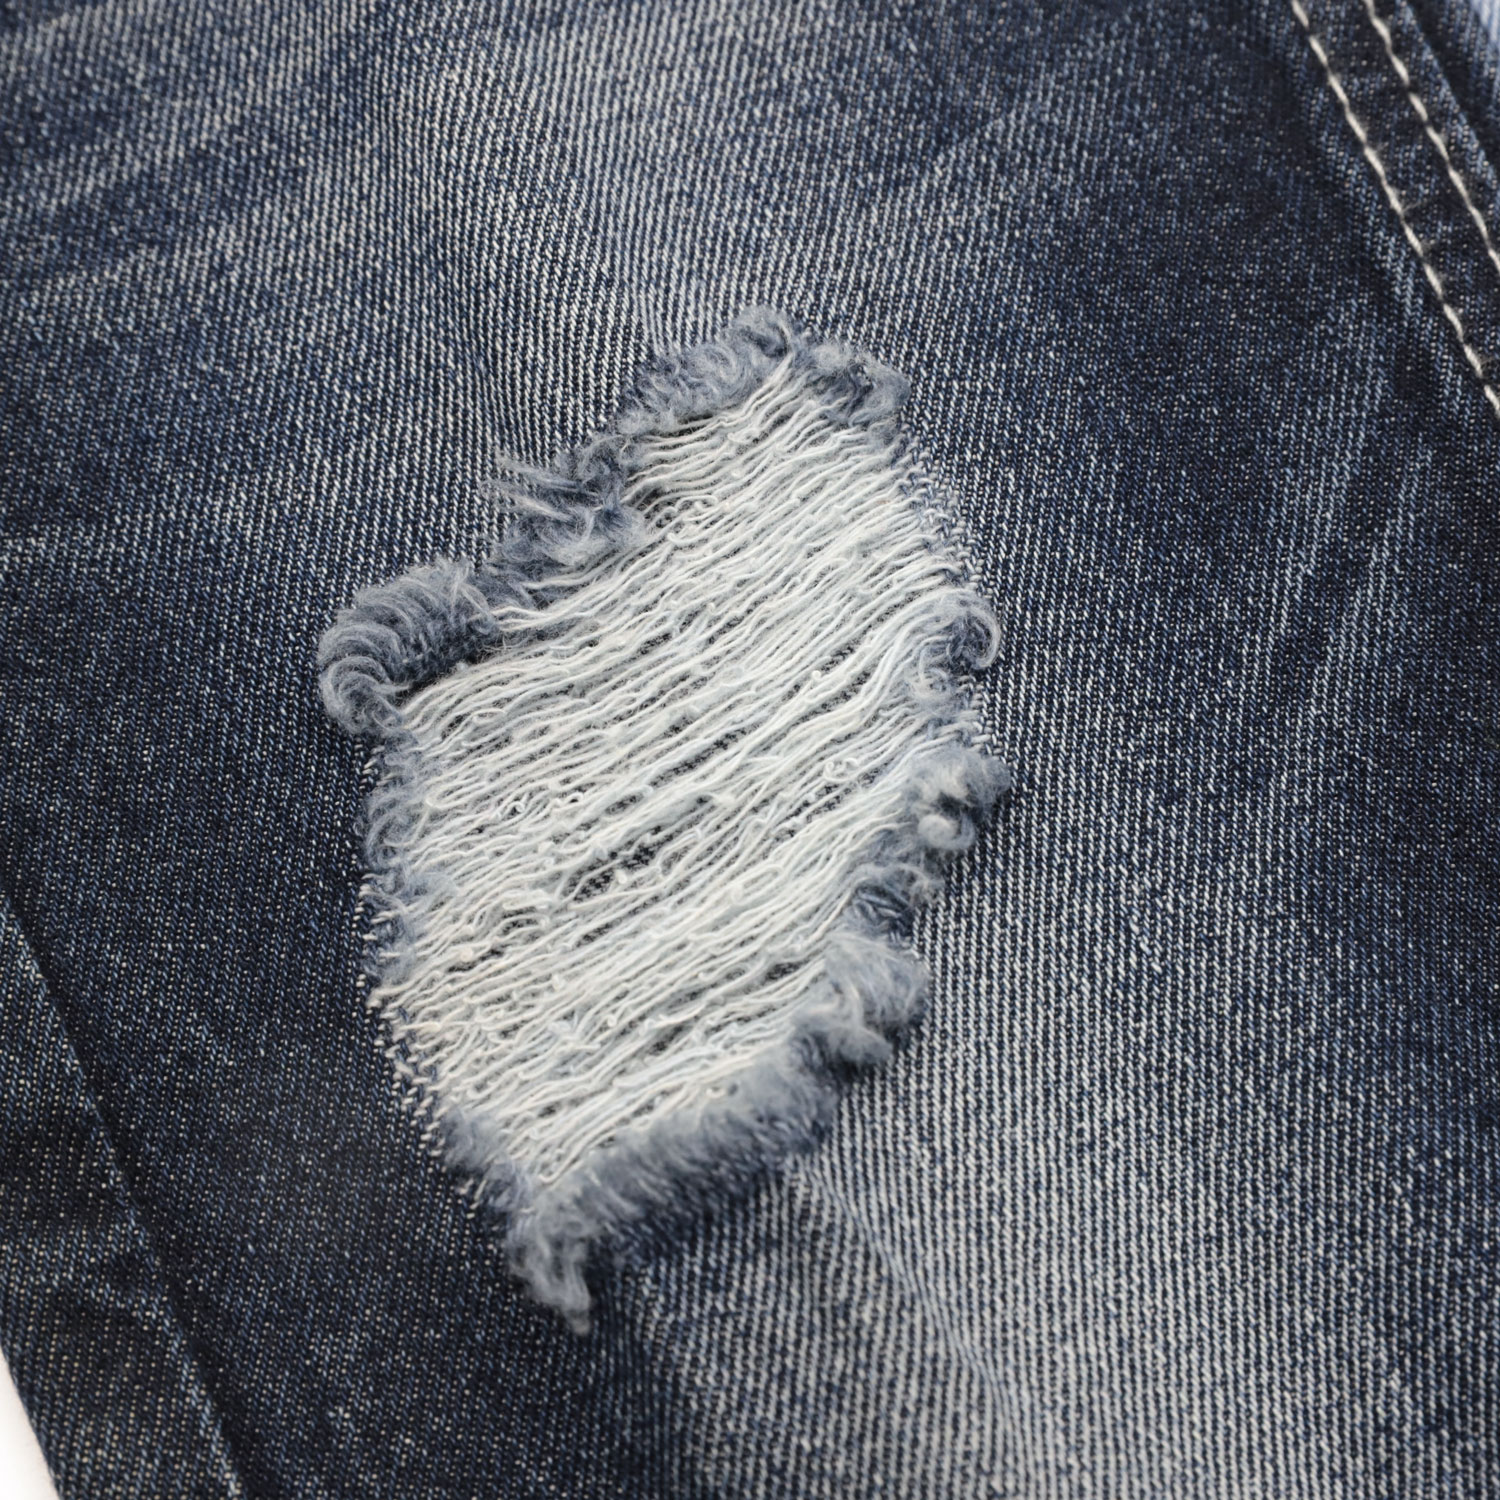 Tips to Help You Design the Perfect Non-stretch Denim Fabric for That Party 1